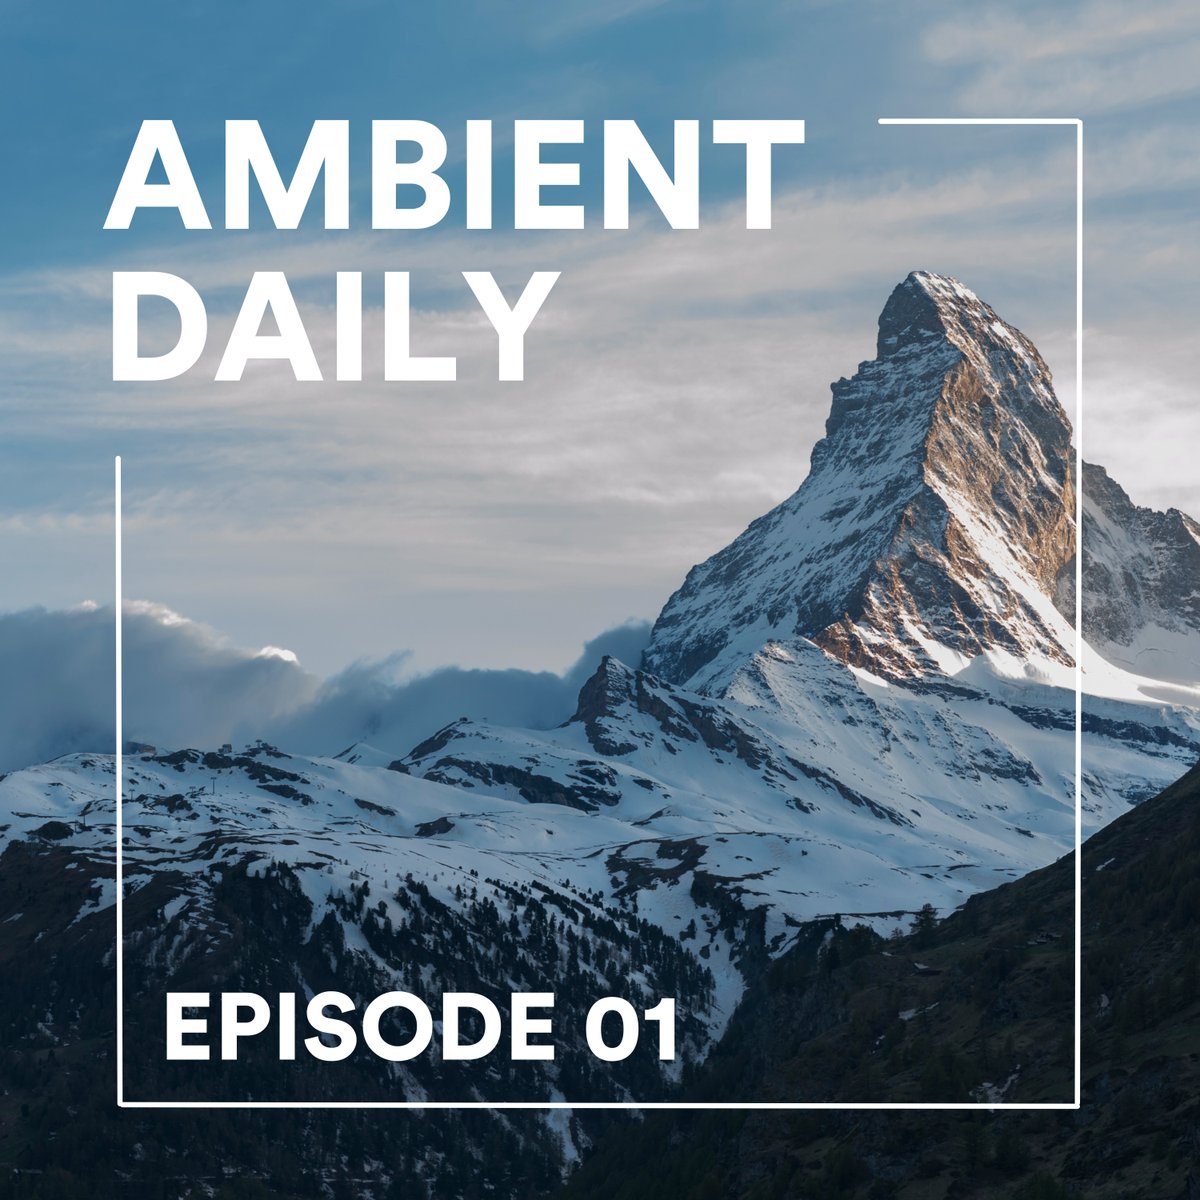 Ambient Daily is now available as a podcast 🎧 Apple Podcast swiy.io/Kykb Spotify swiy.io/Kykc YouTube swiy.io/Kyke Soundcloud swiy.io/Kykf #ambient #ambientmusic #podcast